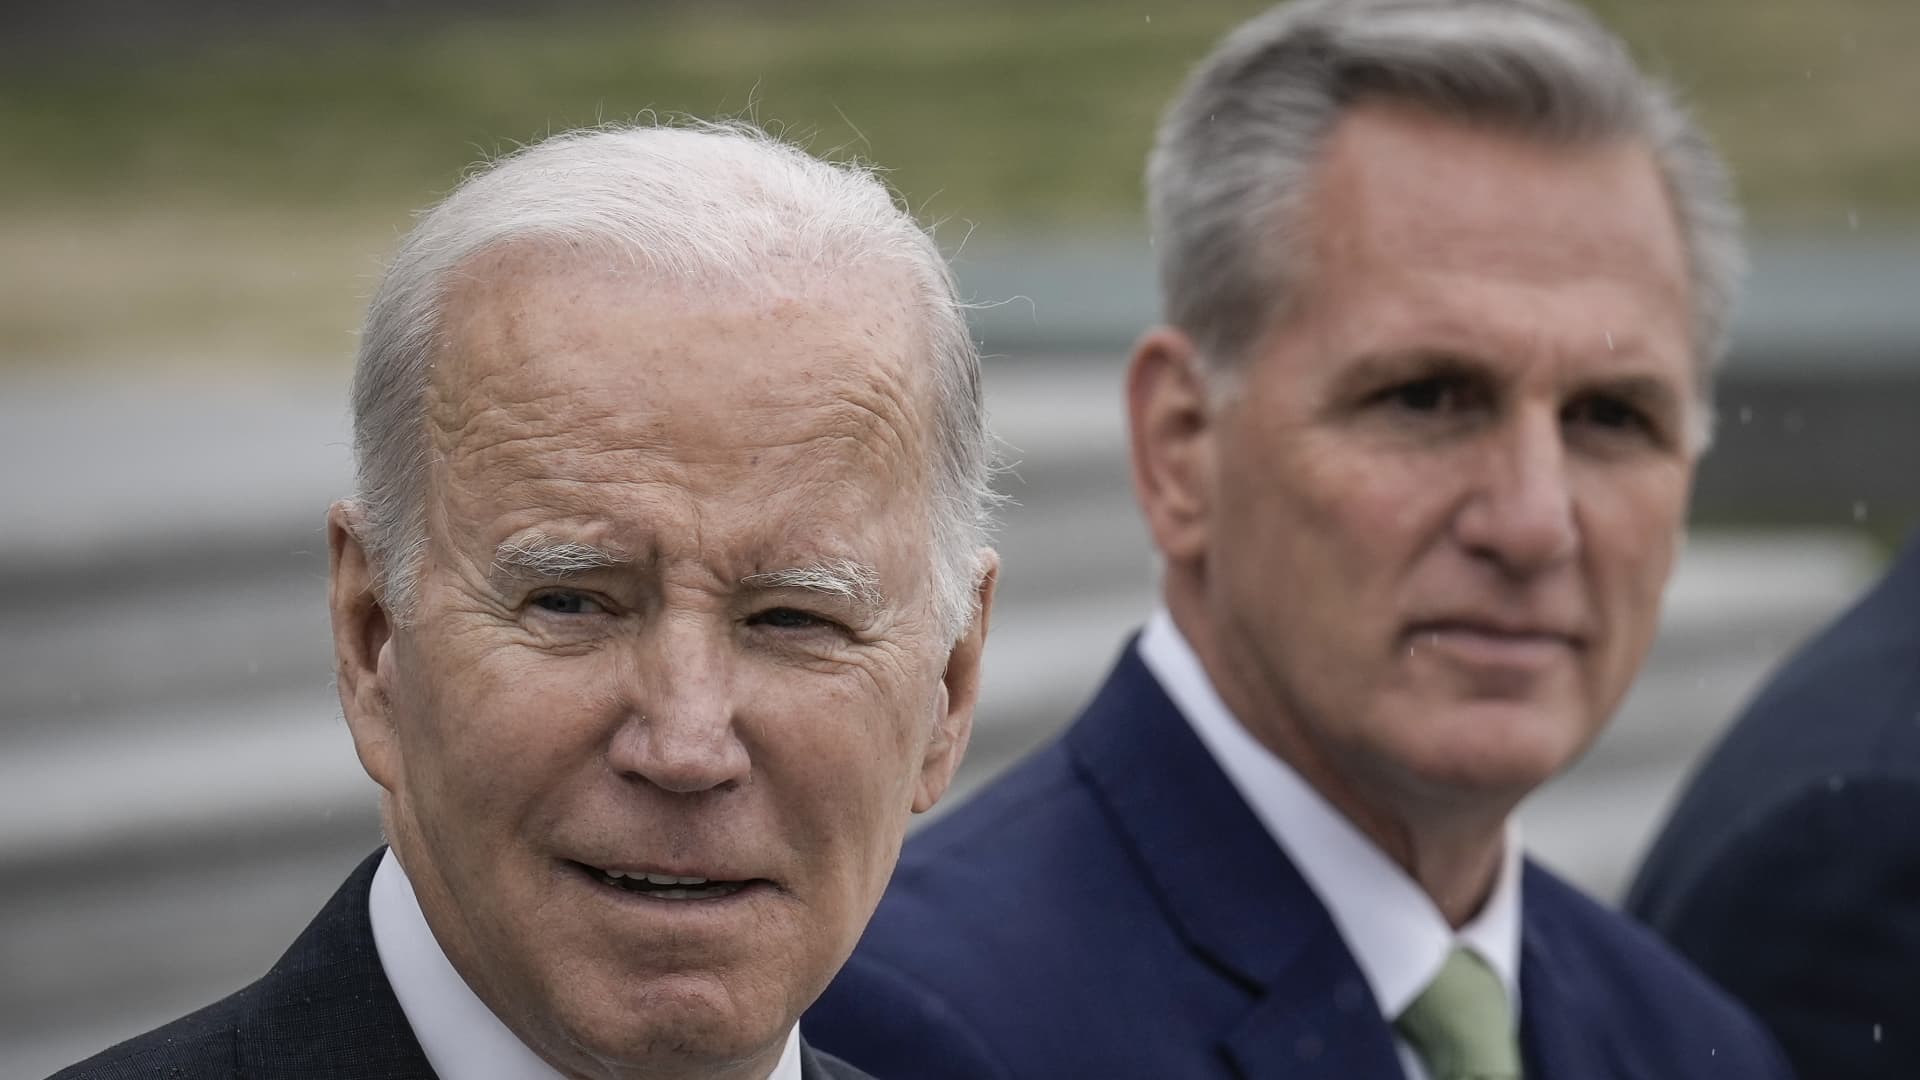 Biden and McCarthy to meet at White House on Monday to try and avoid looming debt default